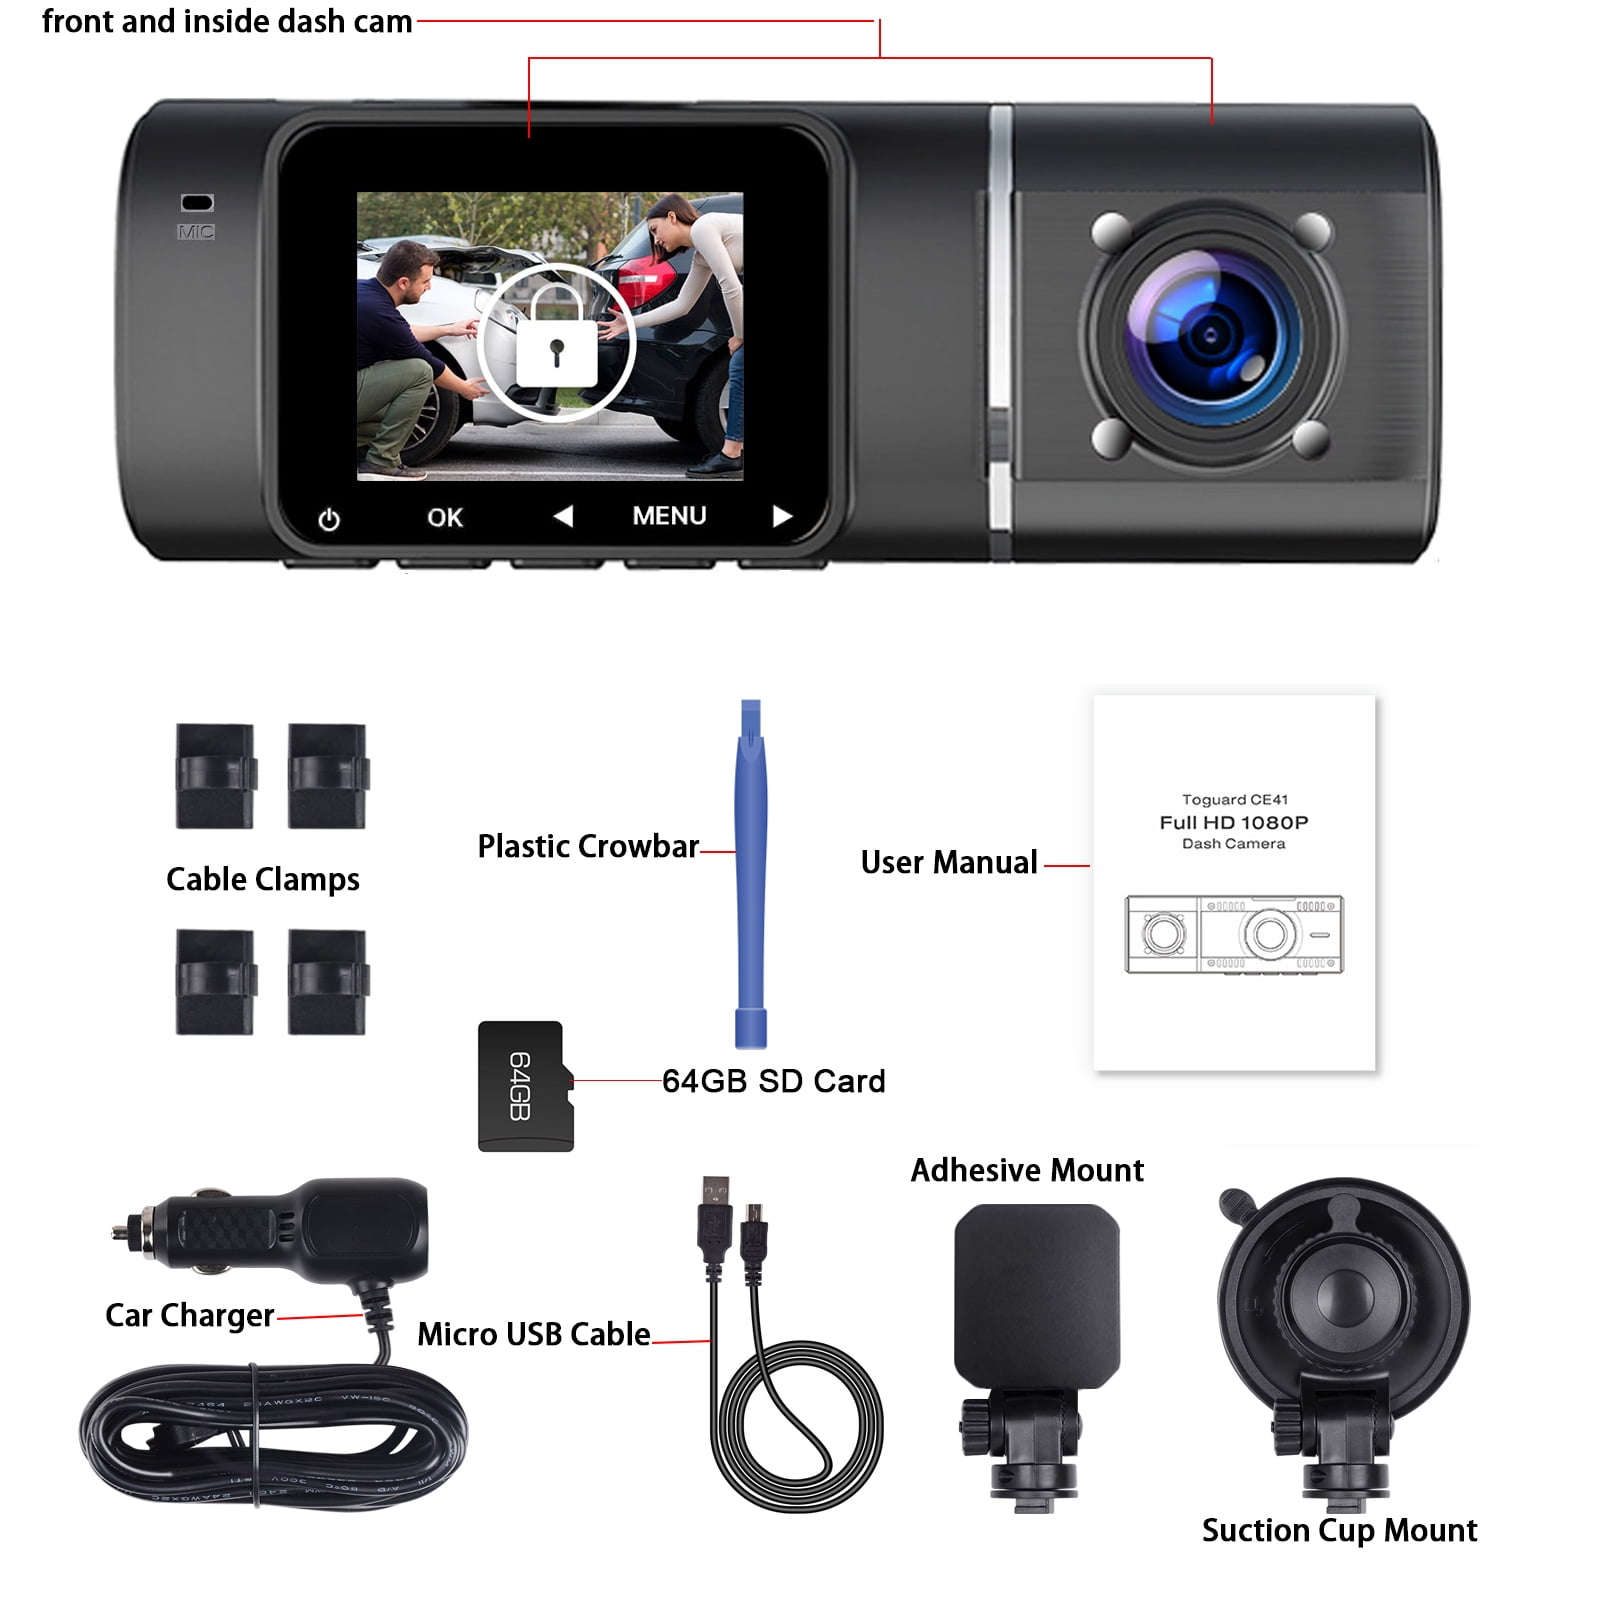 TOGUARD Dash Cam Front and Rear 1080P Full HD Car Camera,2.45 inch Dash  Camera with 64GB SD Card, Super Night Vision, Parking Mode, G-Sensor, Loop  Recording, WDR 